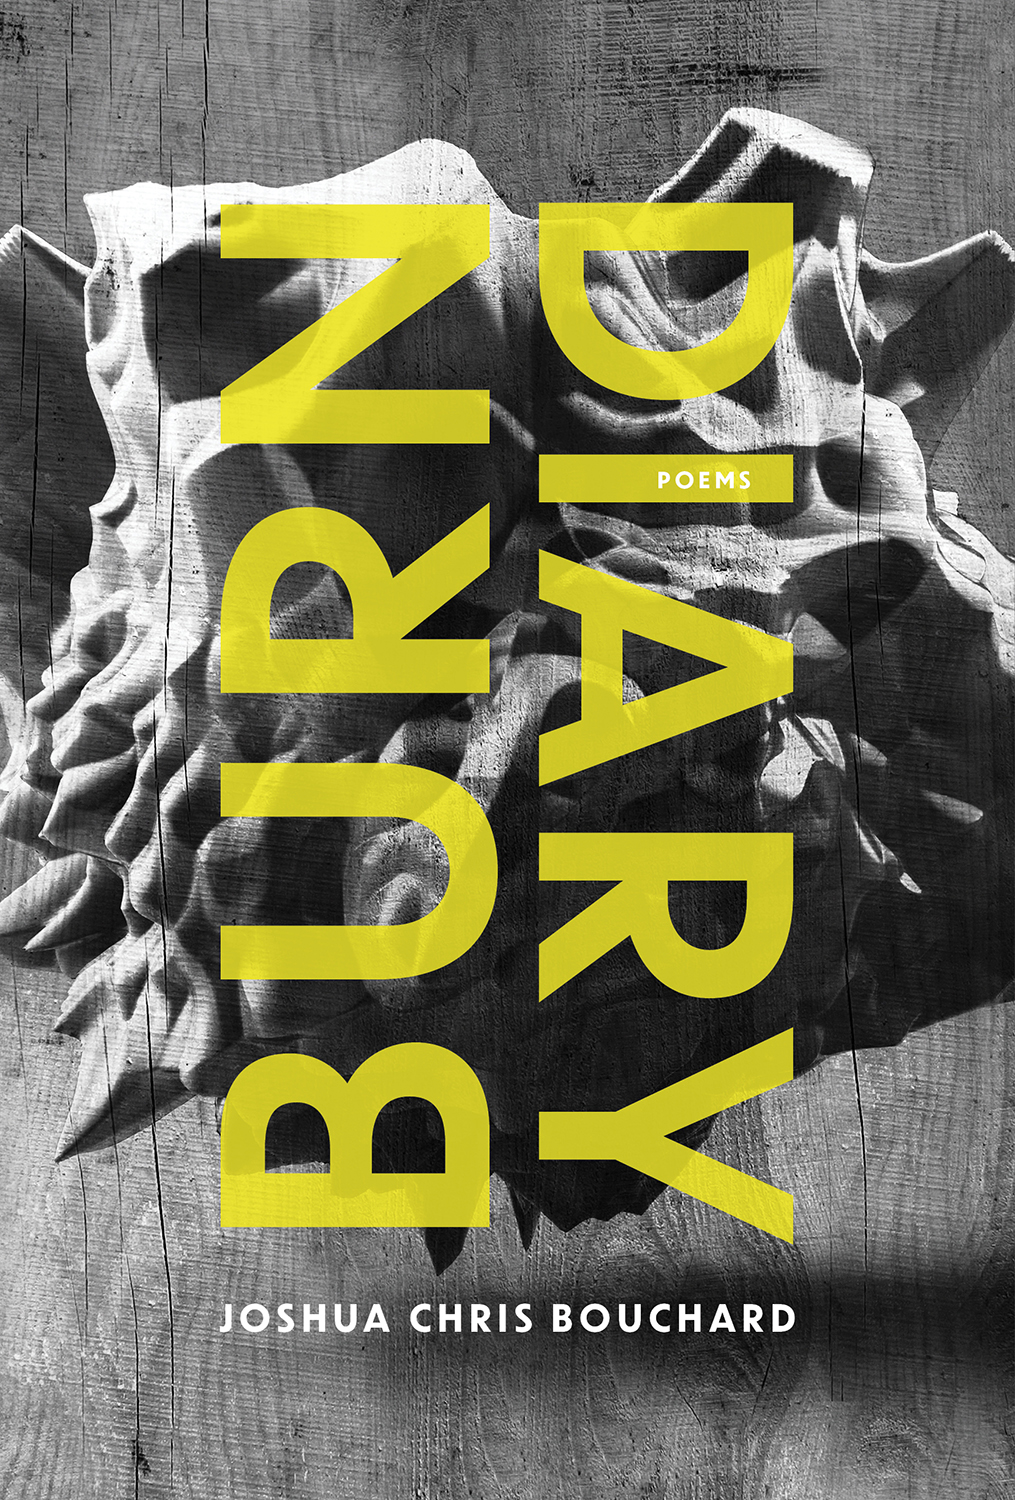 The cover of Burn Diary by Joshua Chris Bouchard.